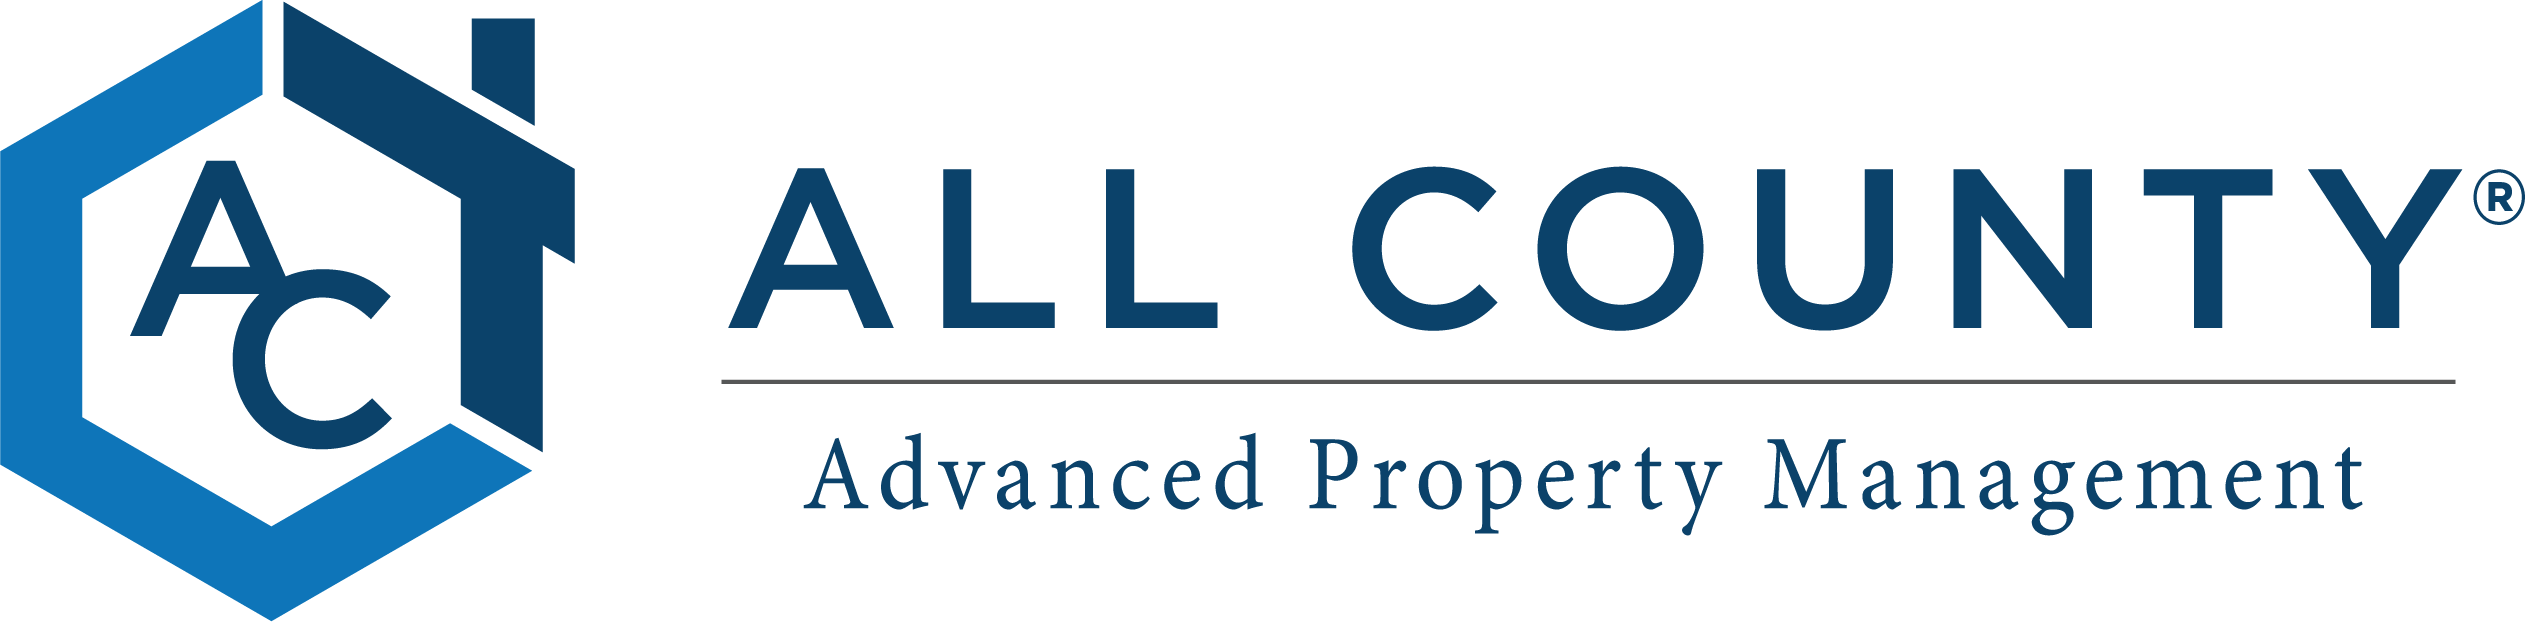 All County Advanced Property Management